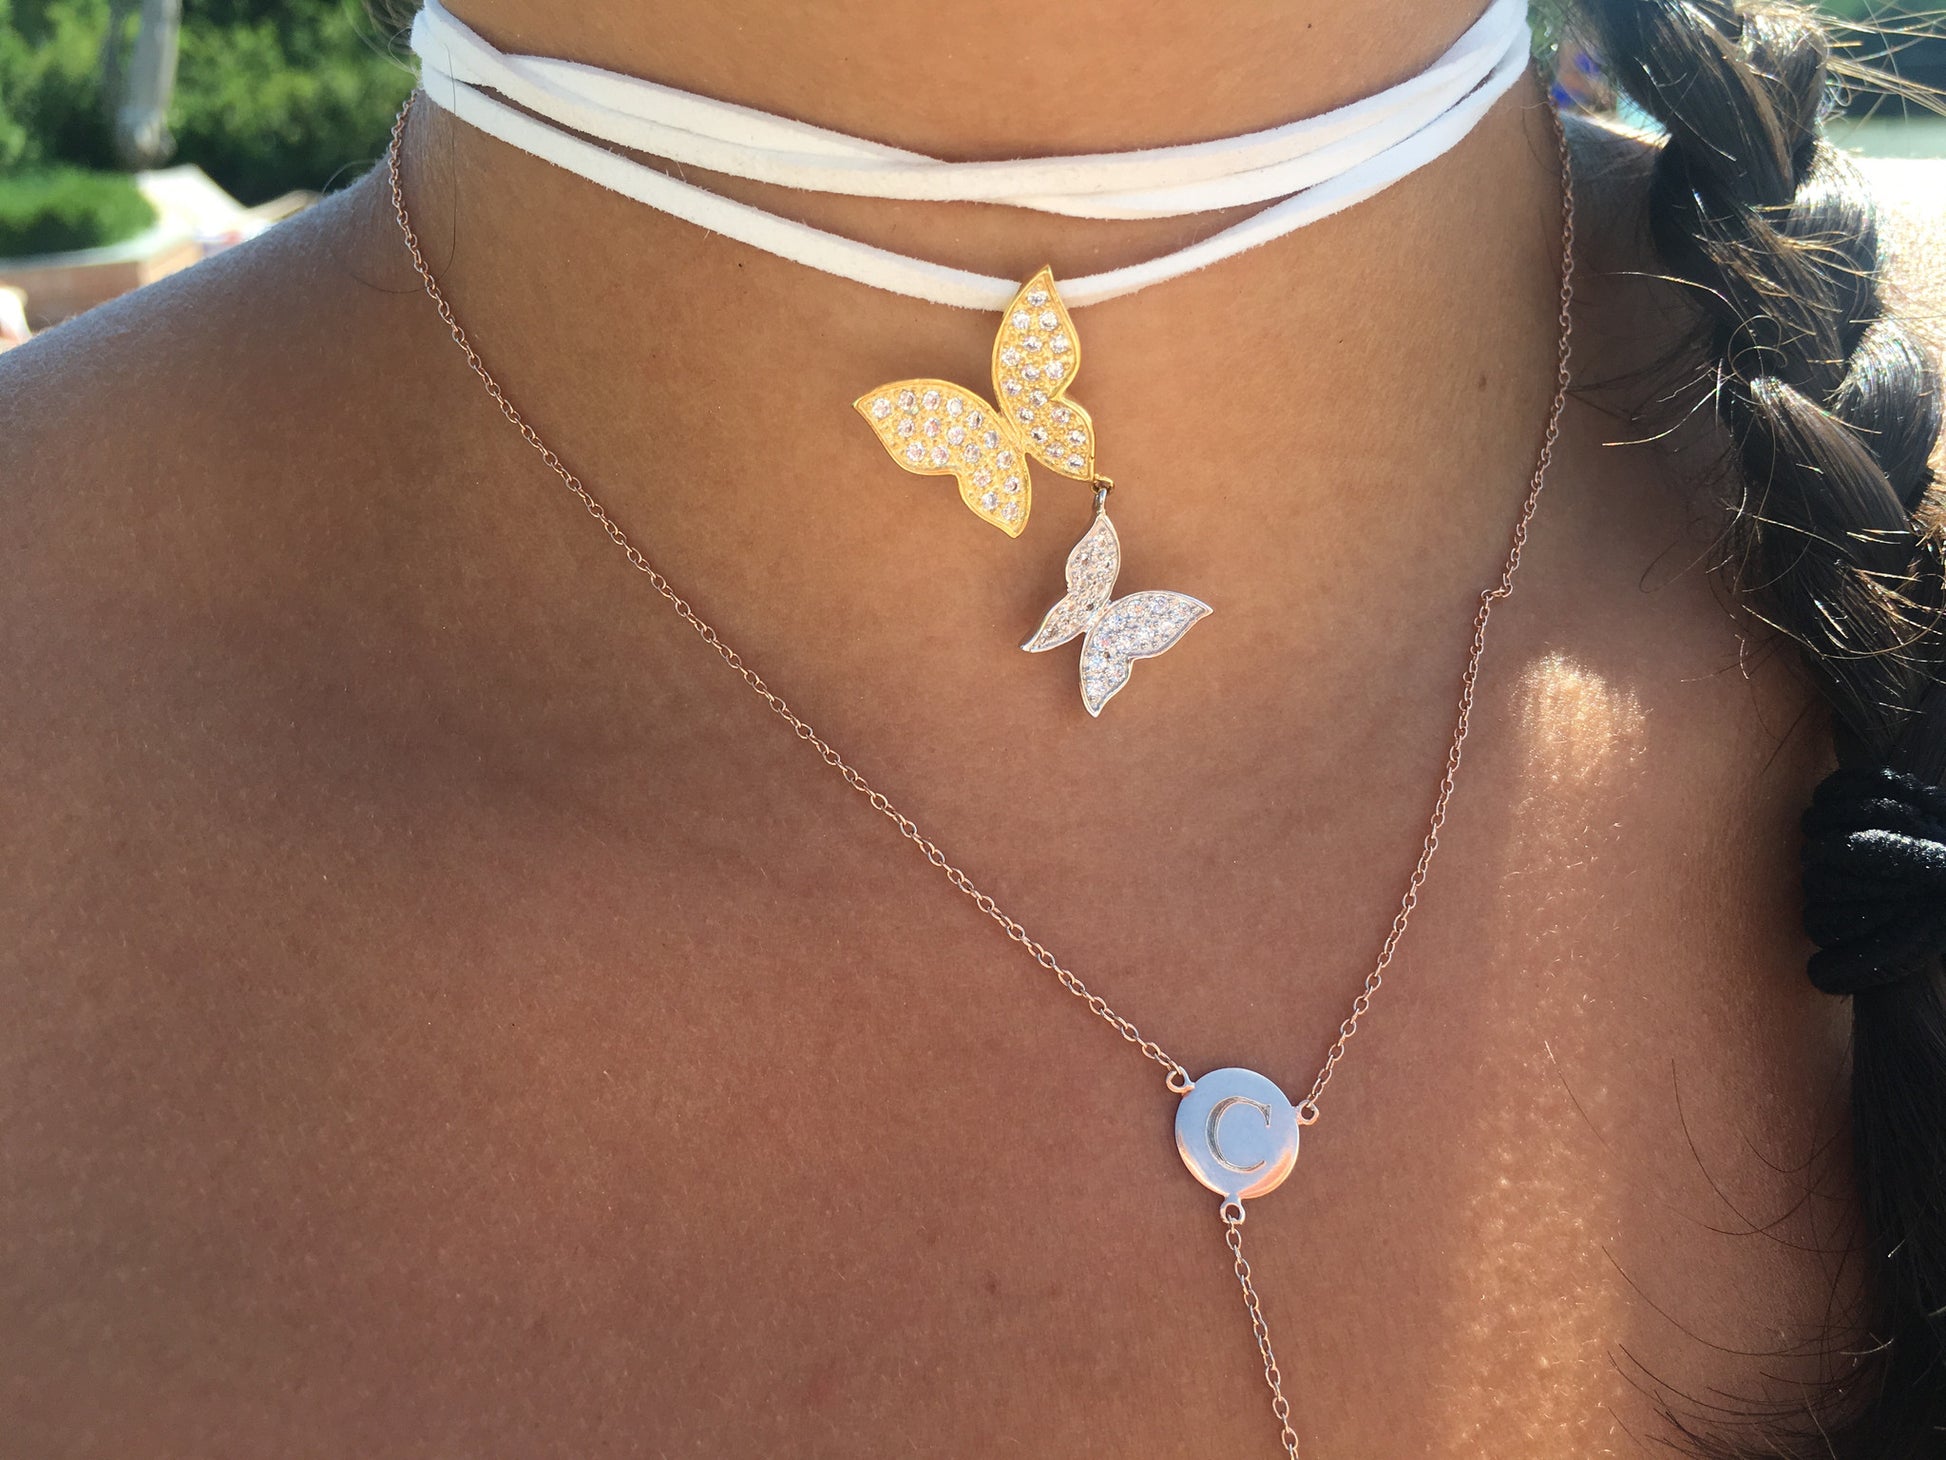 Suede Strap Butterfly Choker - Retail Therapy Jewelry